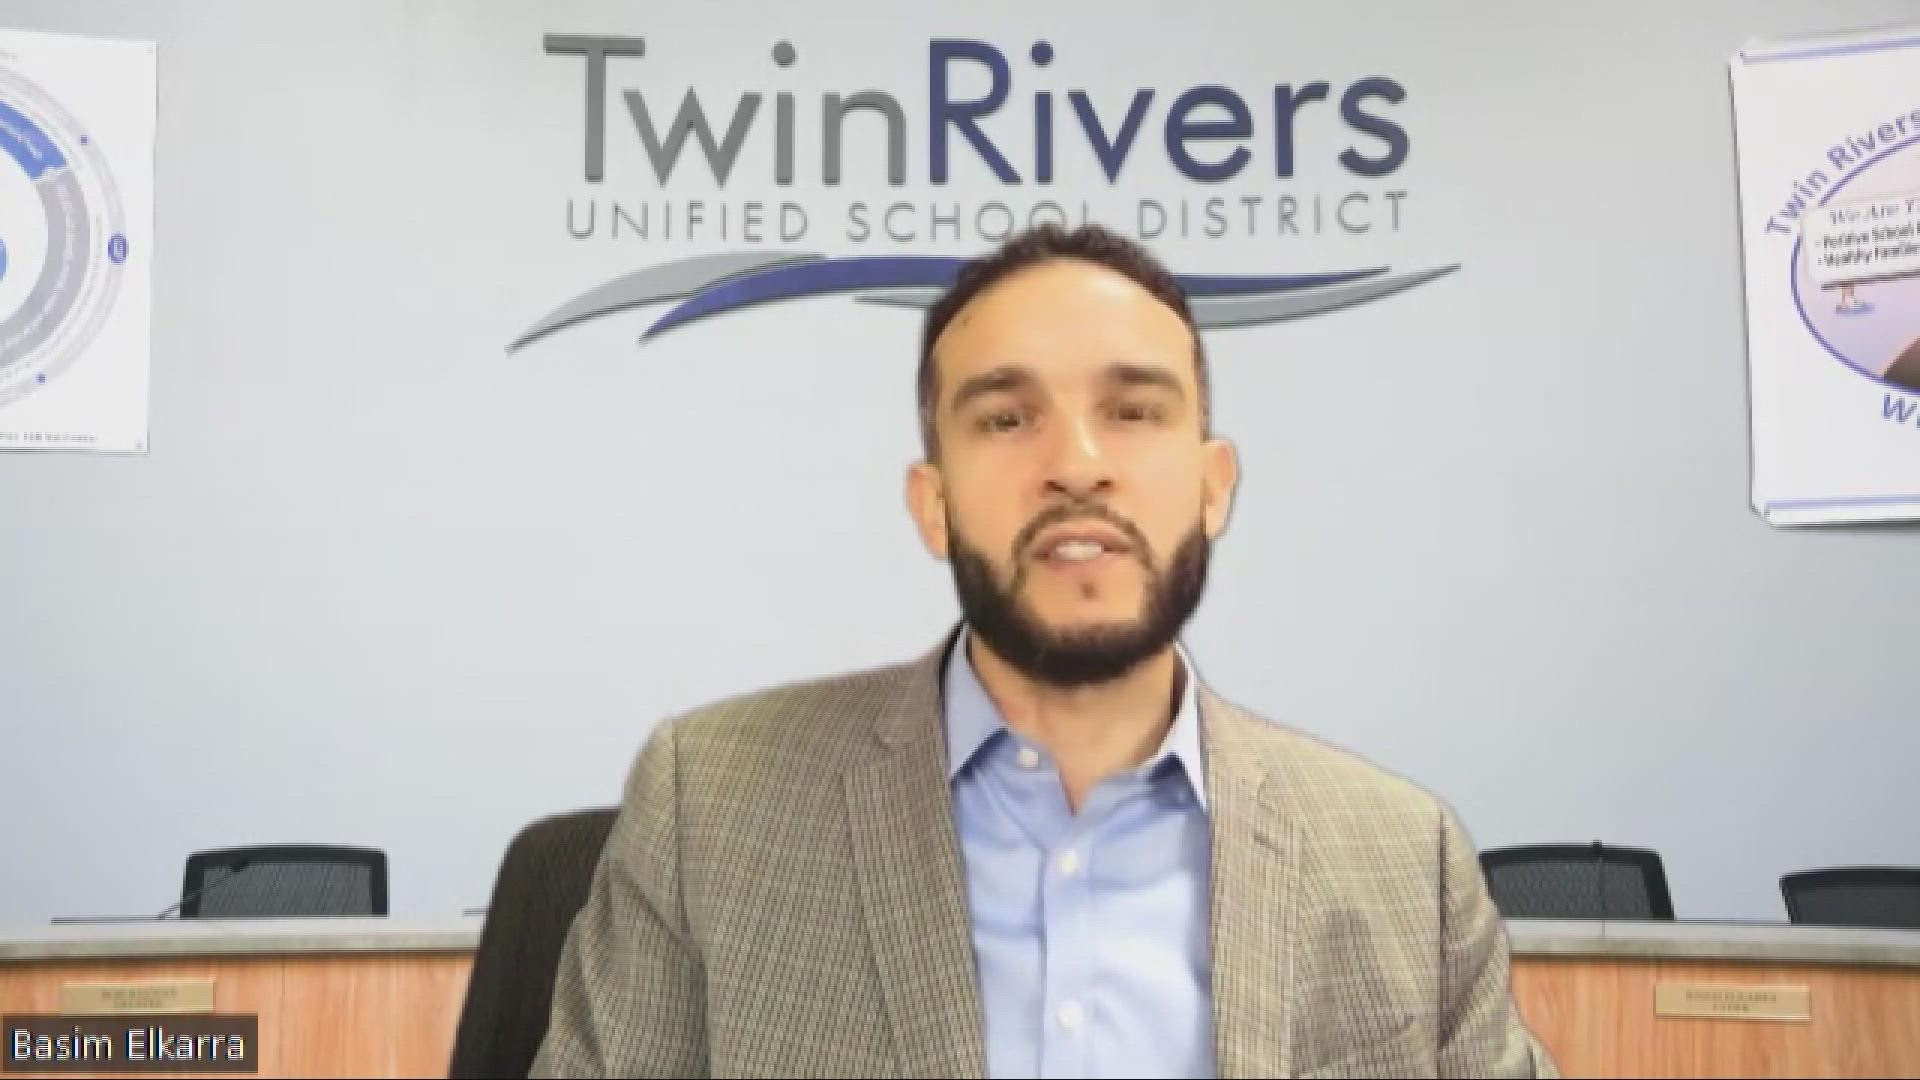 Voters in the Twin Rivers Unified School District are being asked to weigh in on two bond measures that would potentially raise millions for the schools.